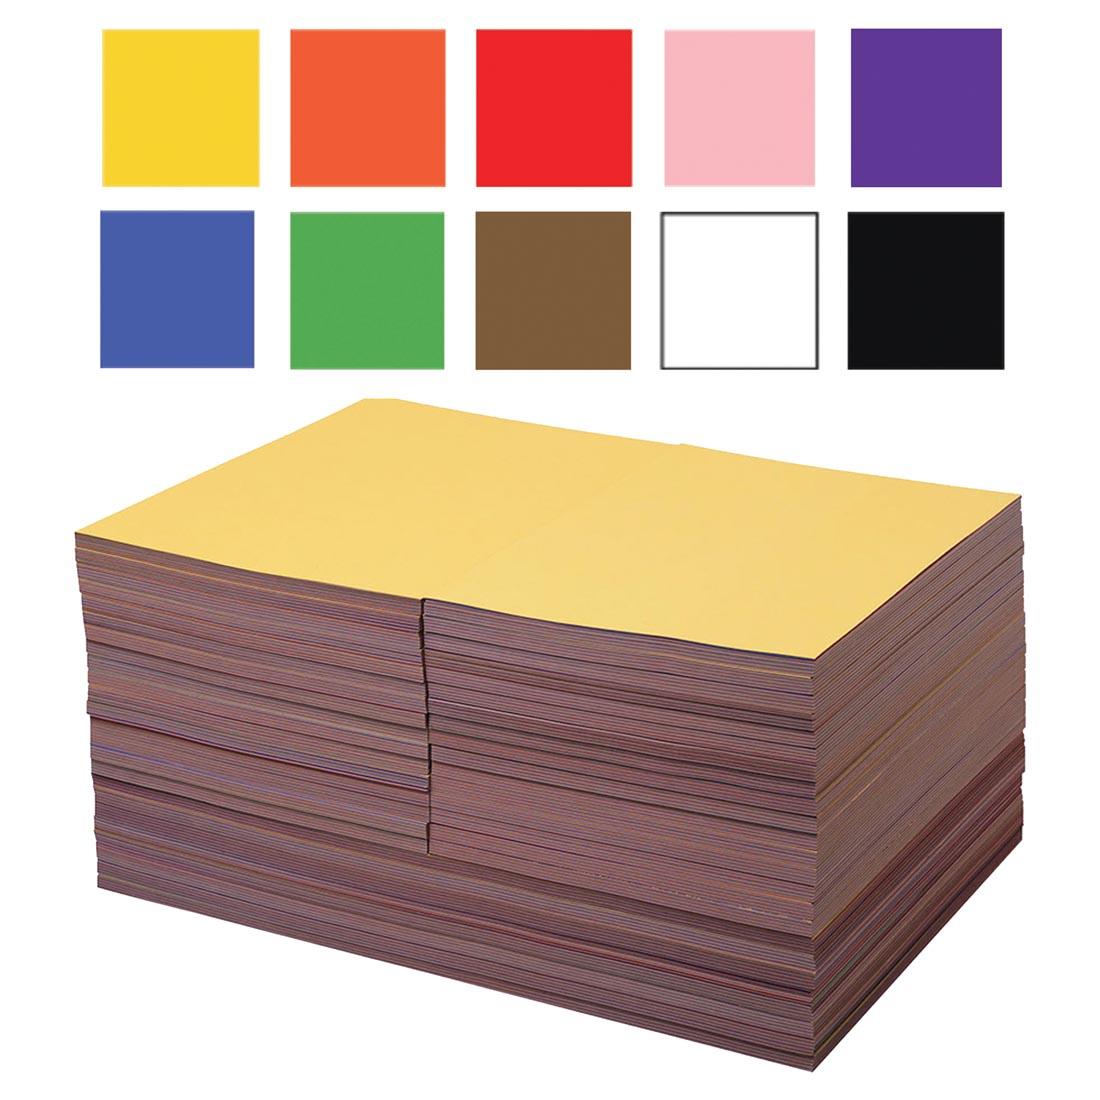 Tru-Ray Construction Paper Combo Case with 10 color swatches